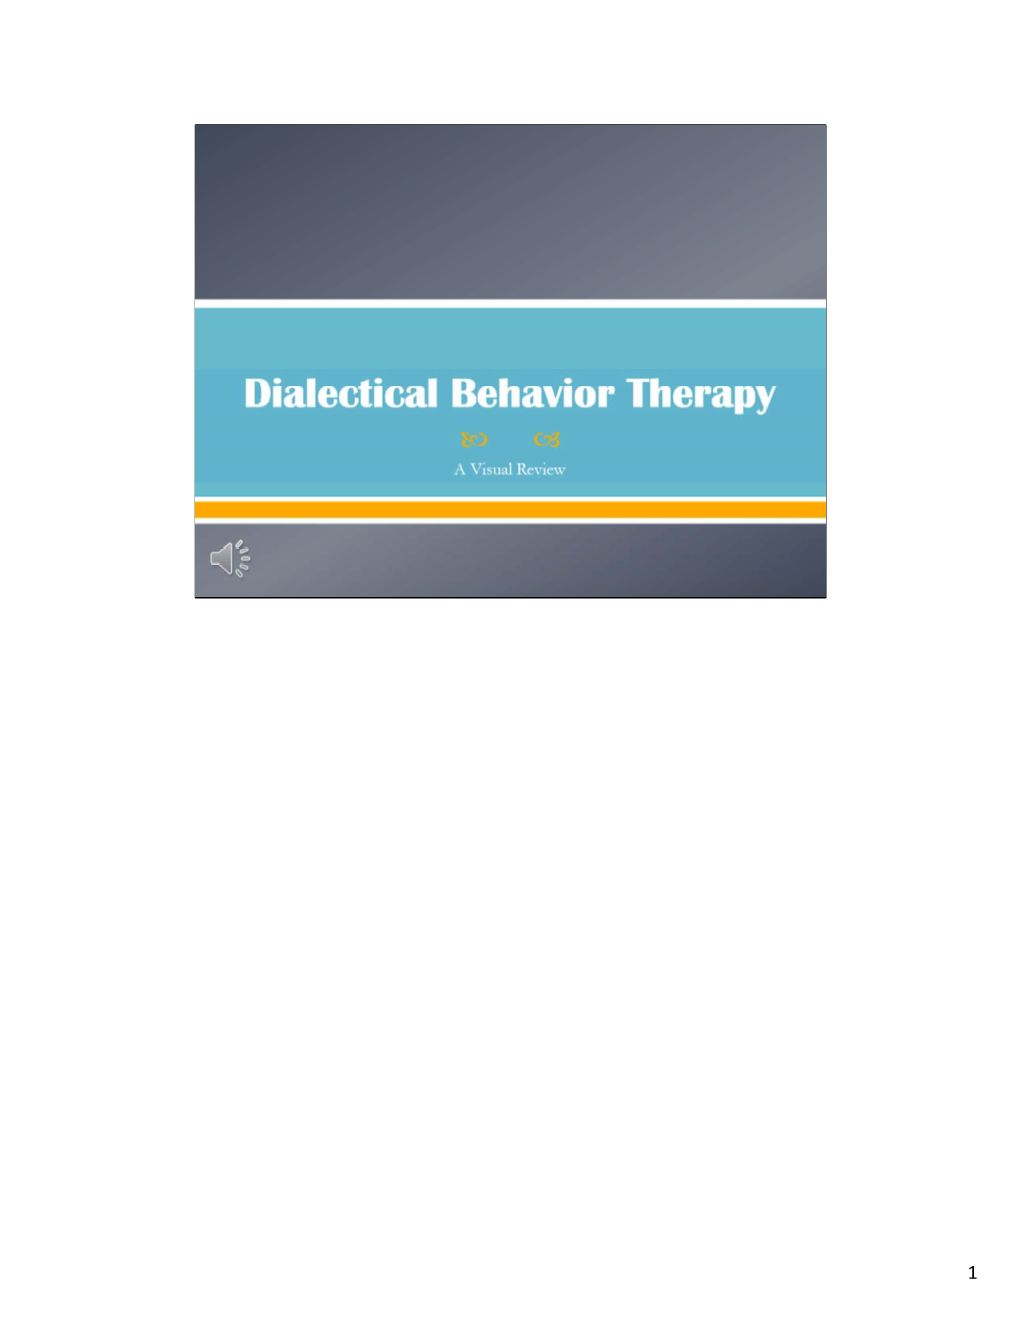 Dialectical Behavior Therapy Visual Review Part 1 Slide Handout With